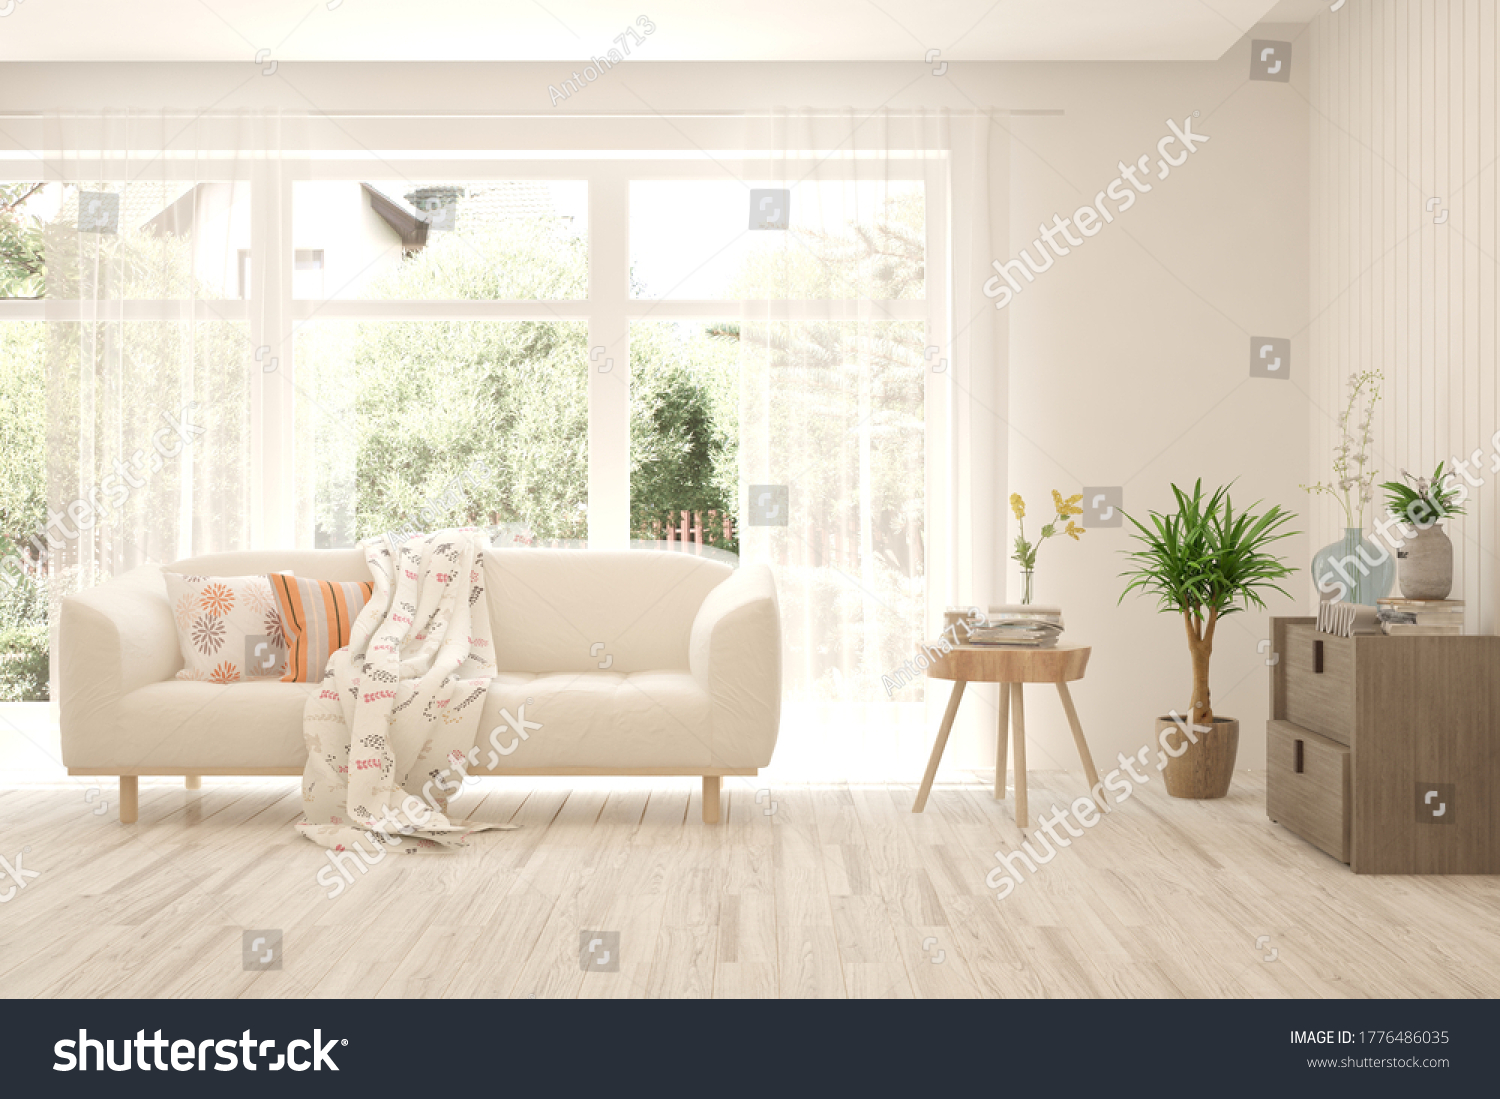 White living room with sofa and summer landscape in window. Scandinavian interior design. 3D illustration #1776486035